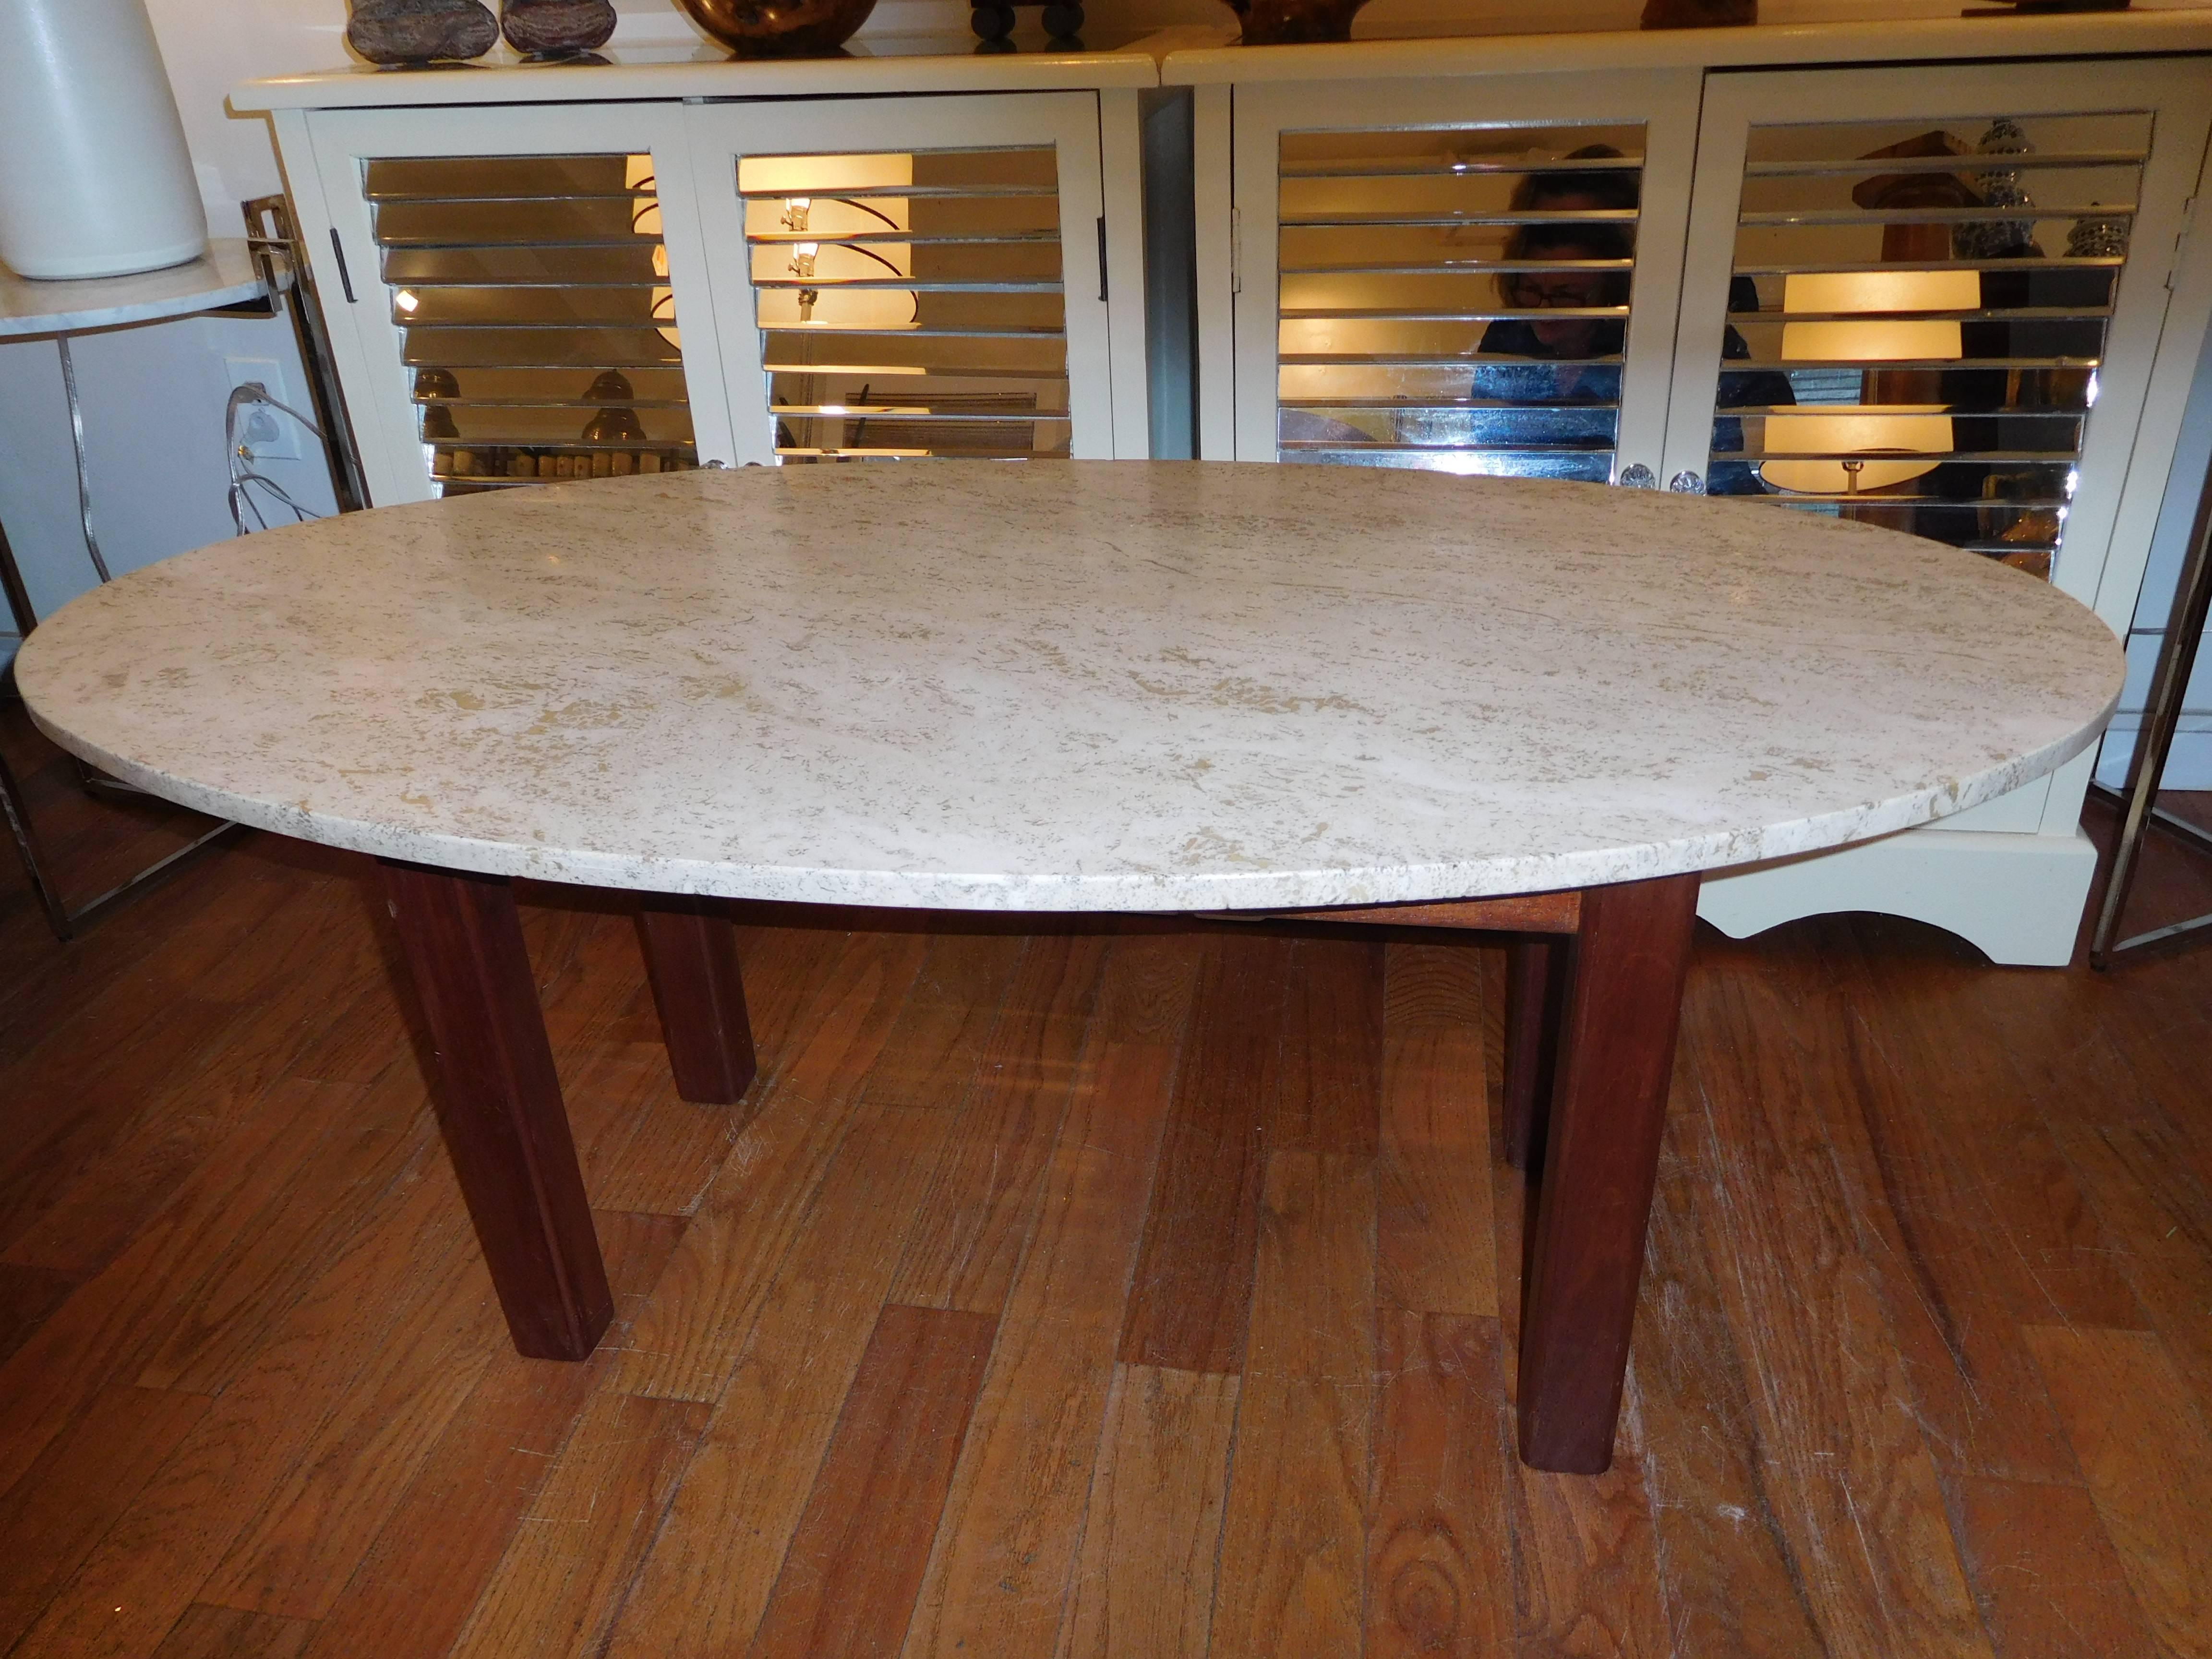 A 1950s travertine and wood handcrafted coffee table, simple clean lines, warm tones, and very functional.
     